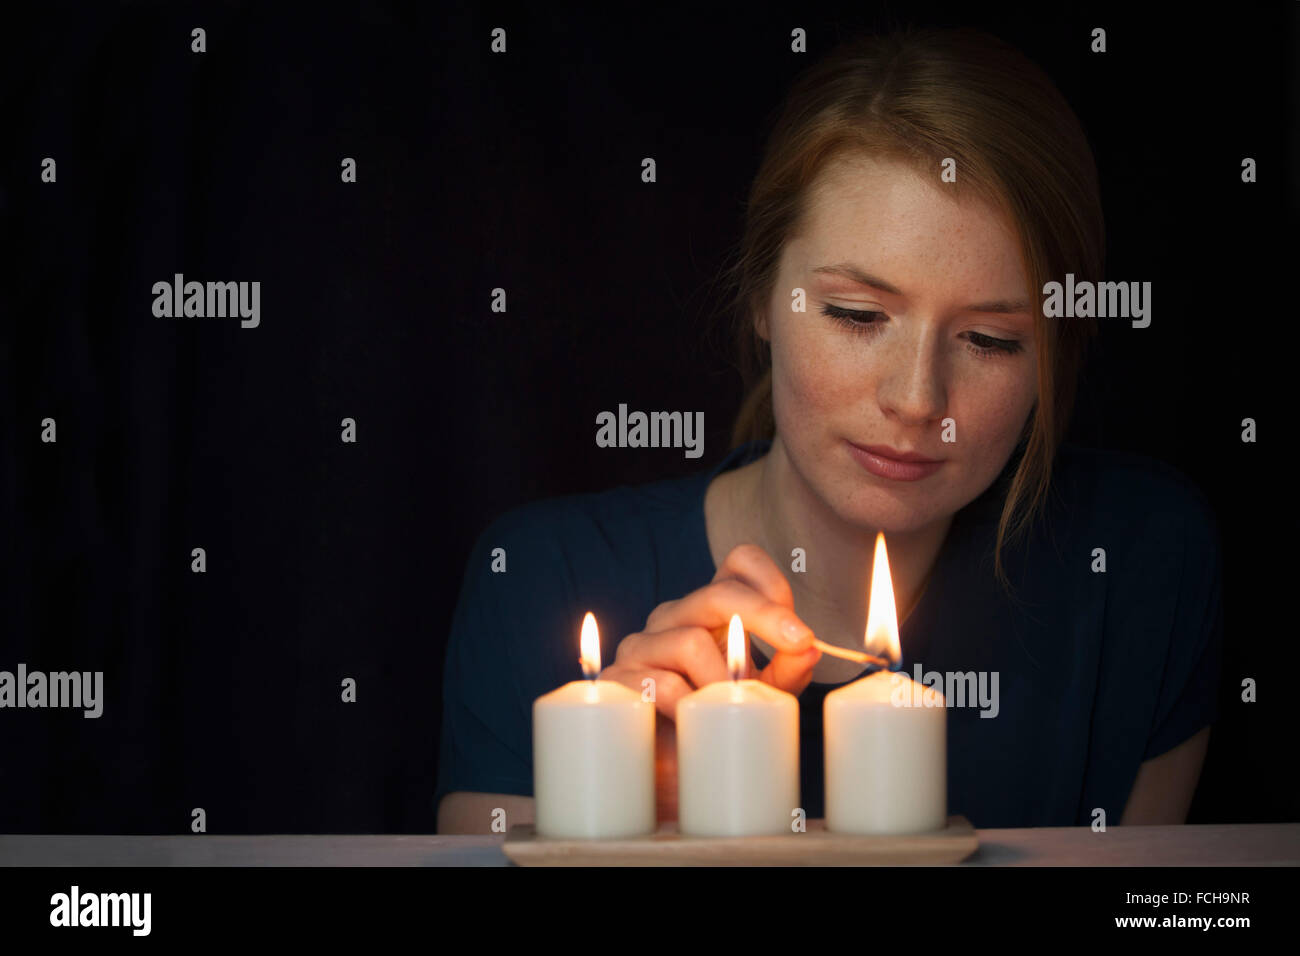 Portrait of young woman lighting candles Stock Photo